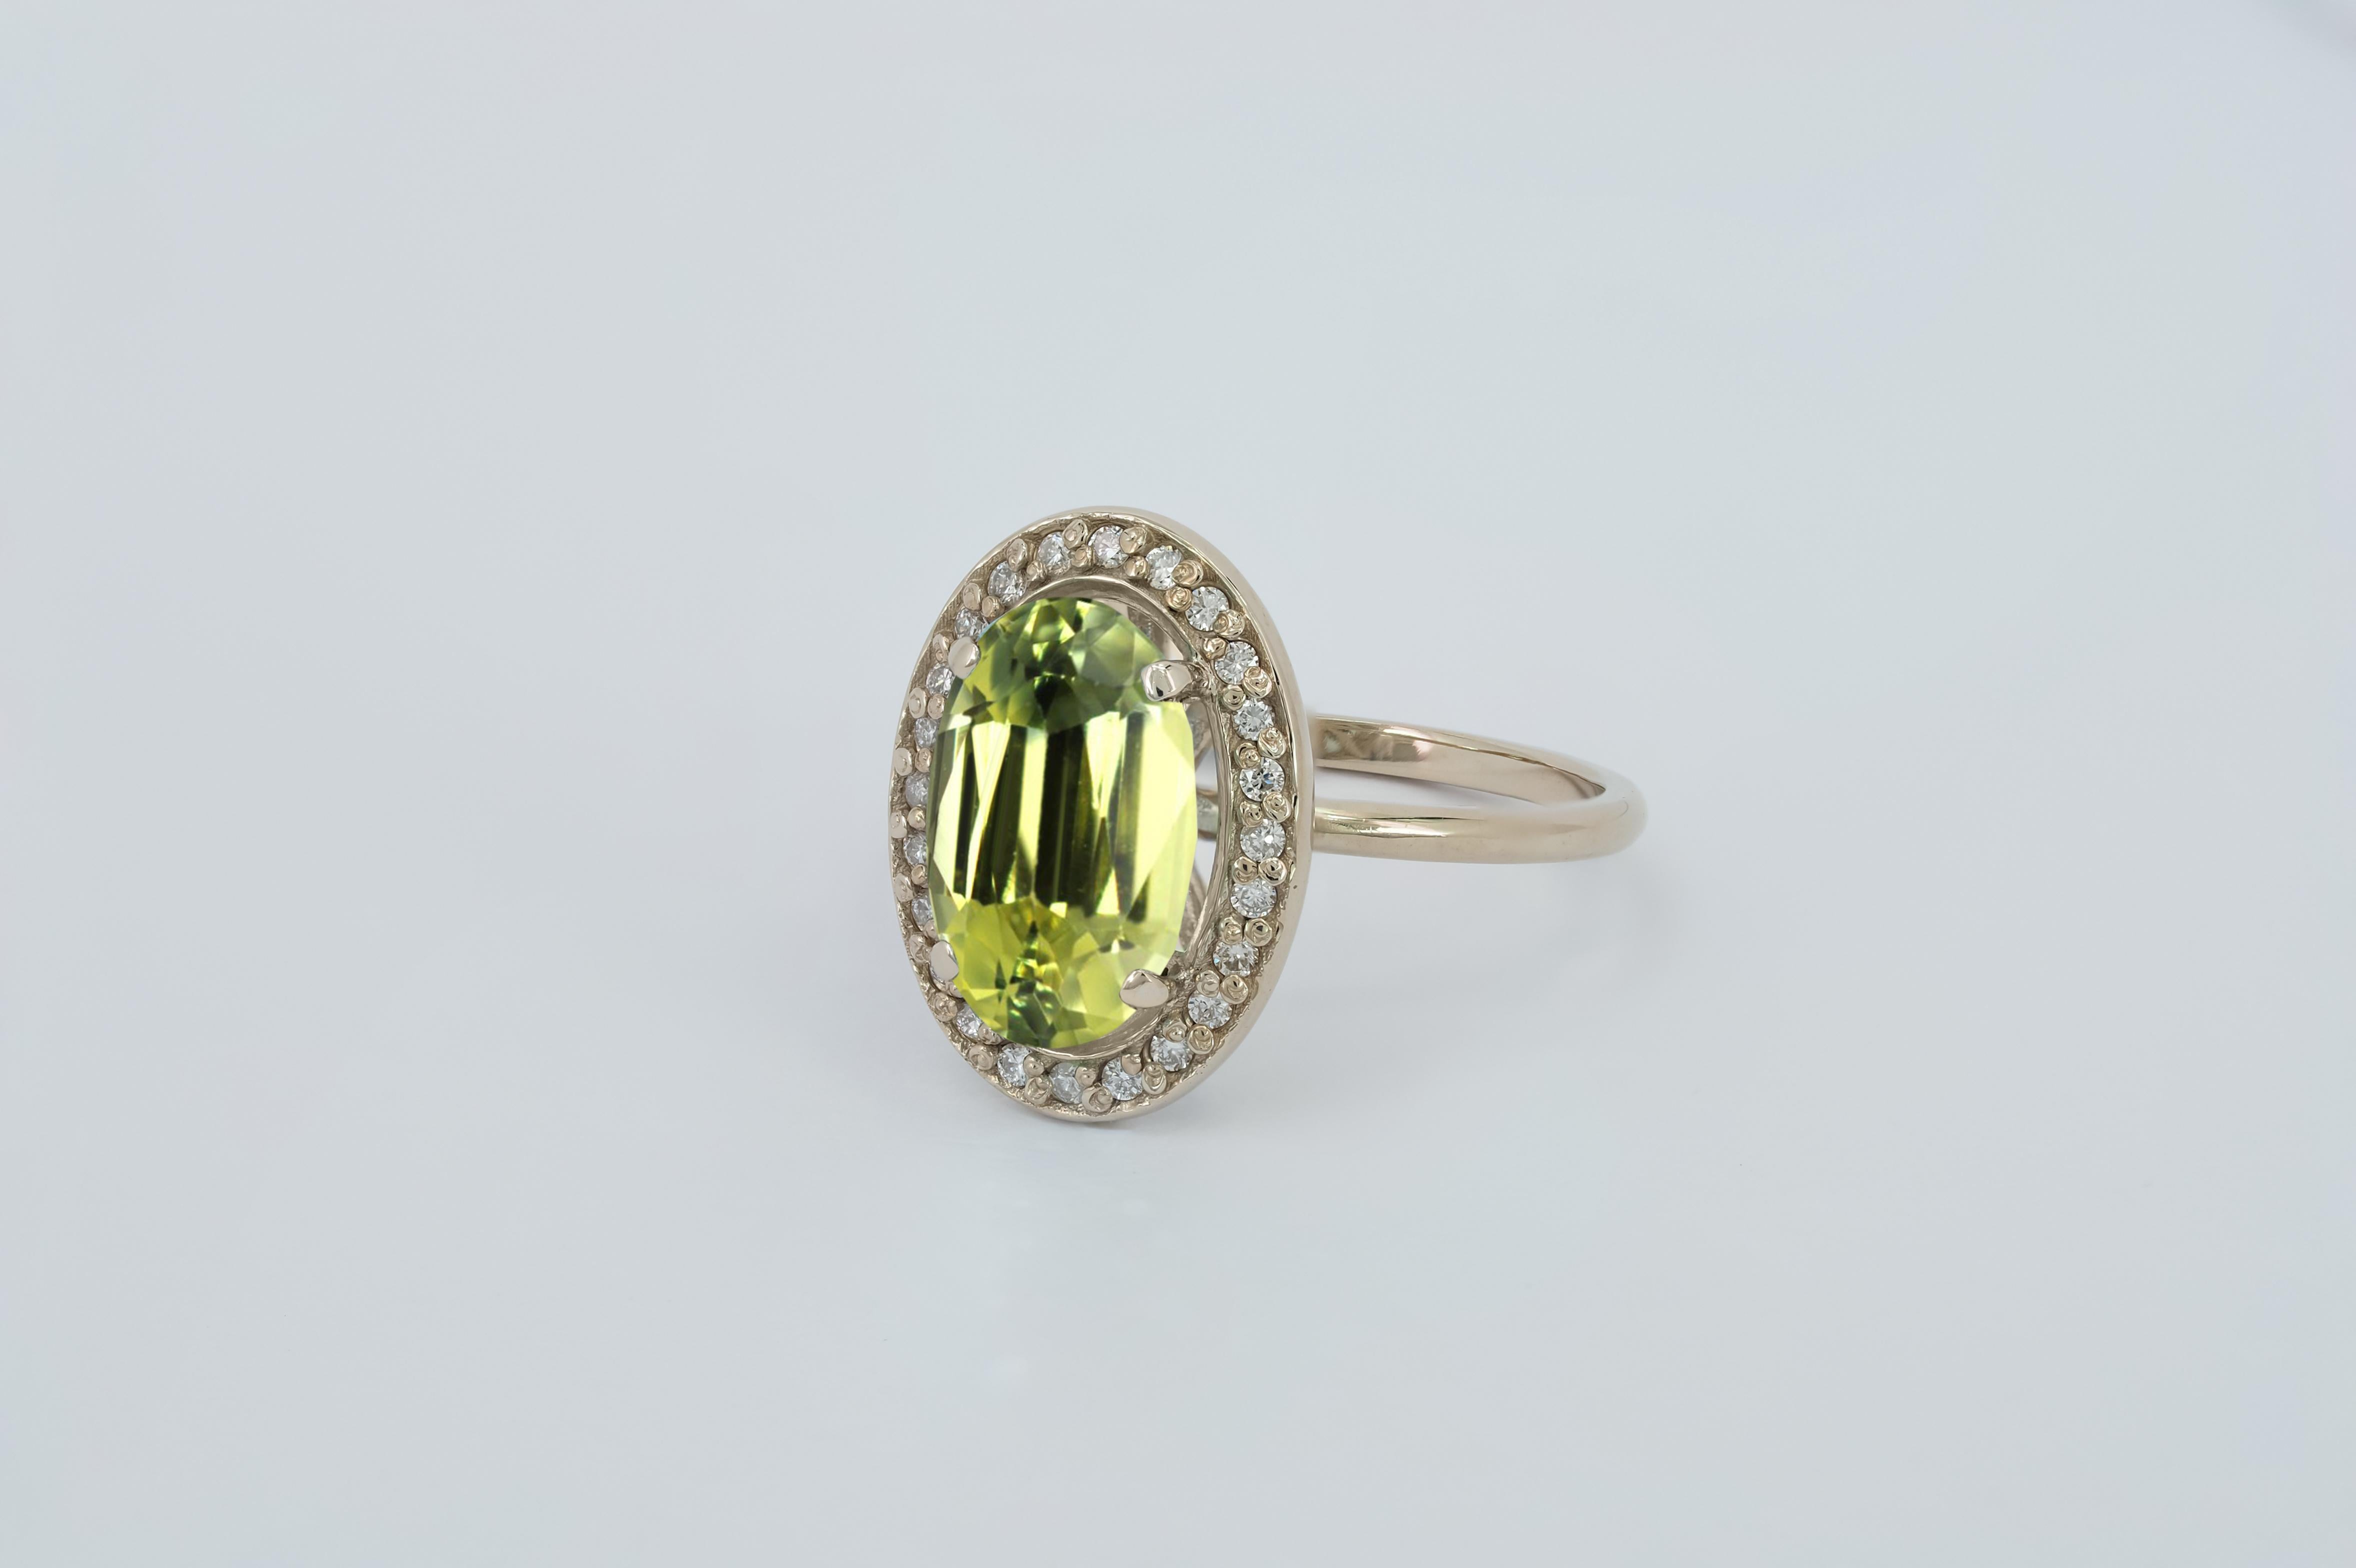 For Sale:  Peridot and diamonds 14k gold ring. 5